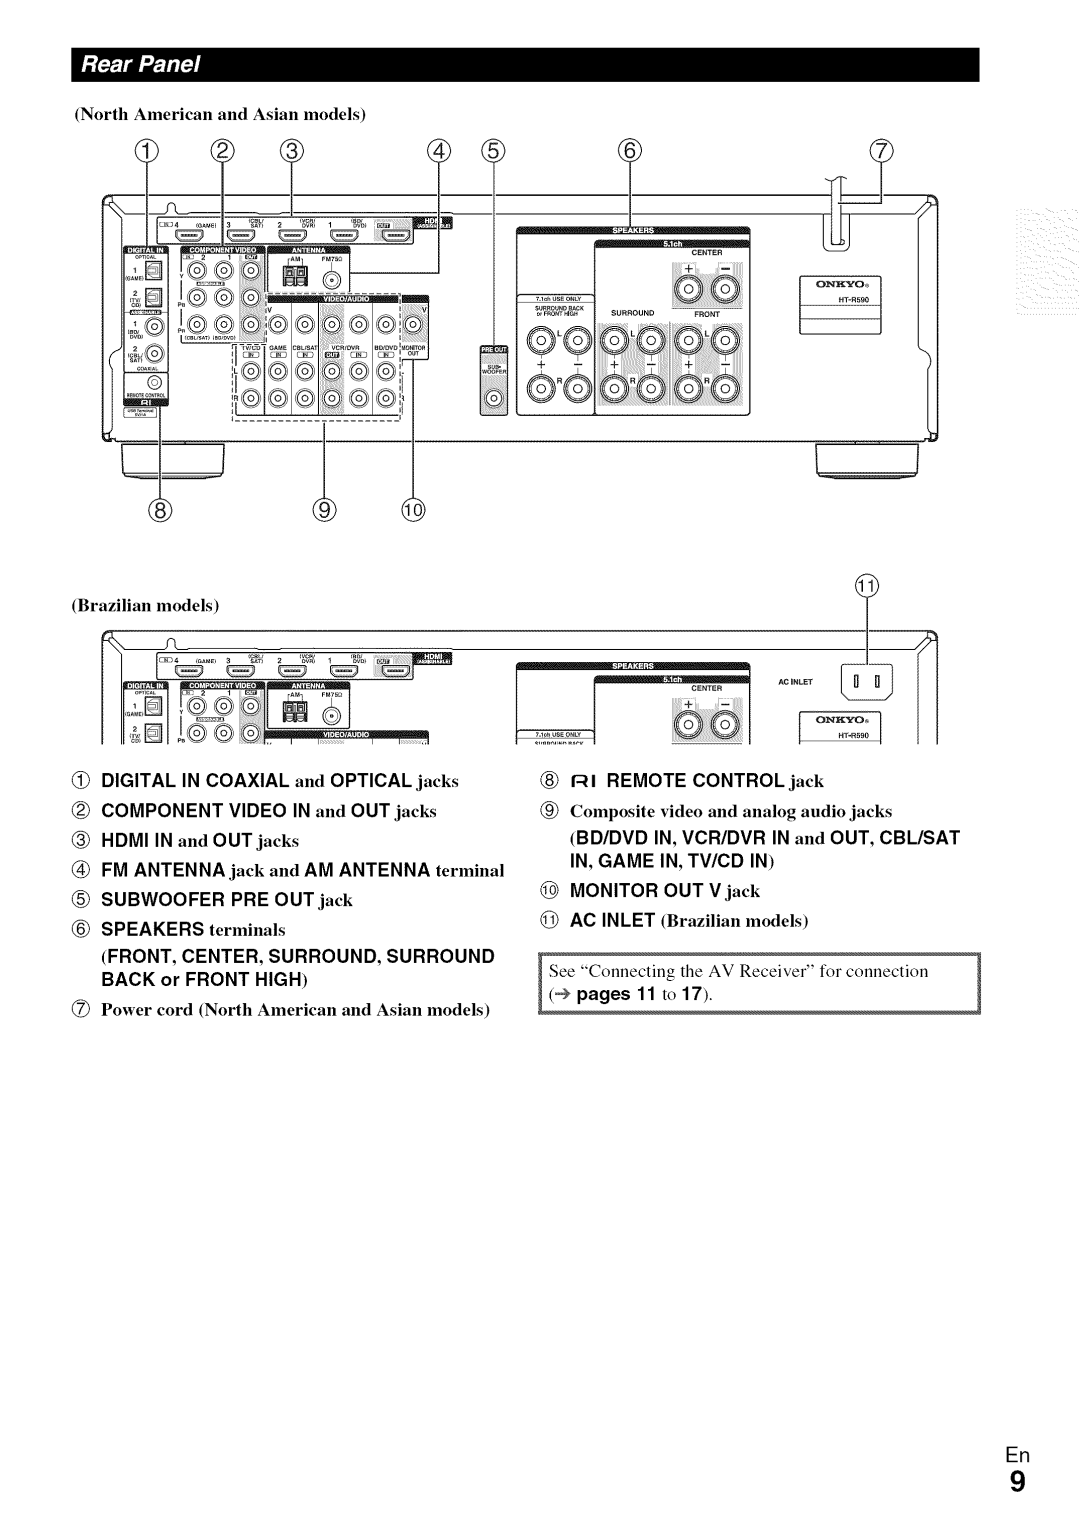 Onkyo HT-R590 instruction manual J. >, nE_0,E,911!@1, SPEAKERS terminals, IN, GAME IN, TV/CD IN @MONITOR OUT V jack 